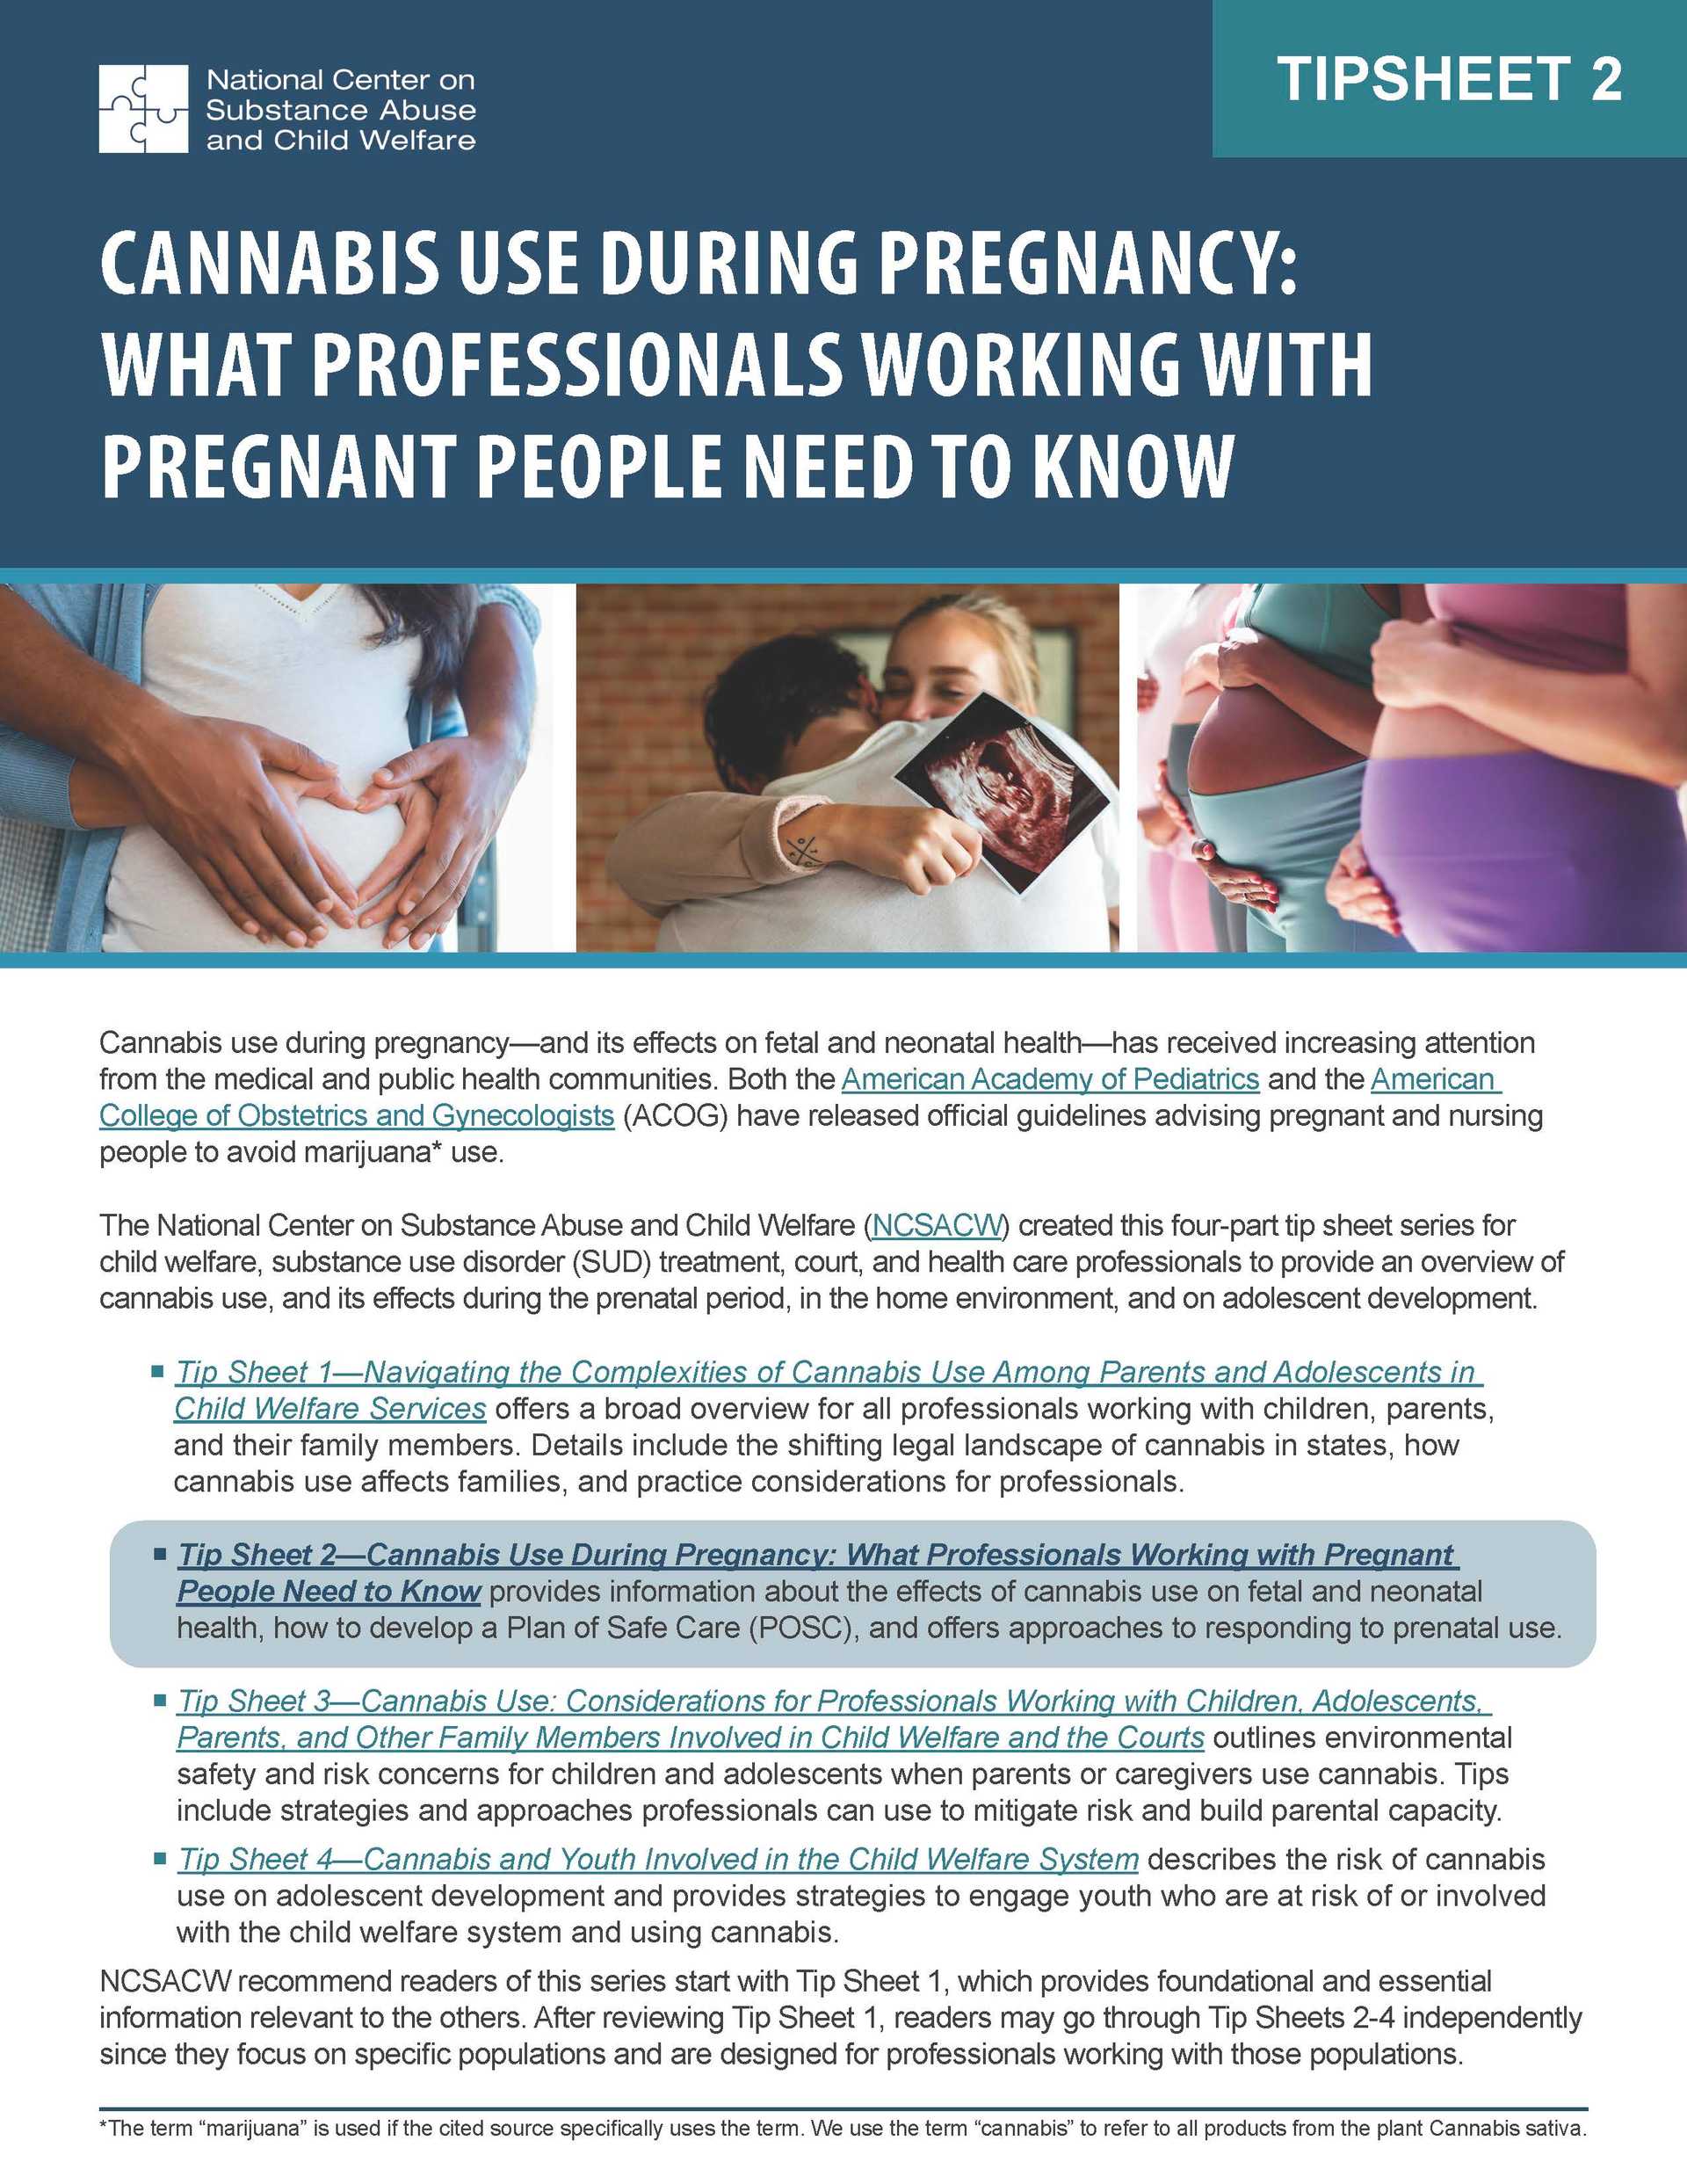 Tip Sheet 2: Cannabis Use During Pregnancy: What Professionals Working with Pregnant People Need to Know